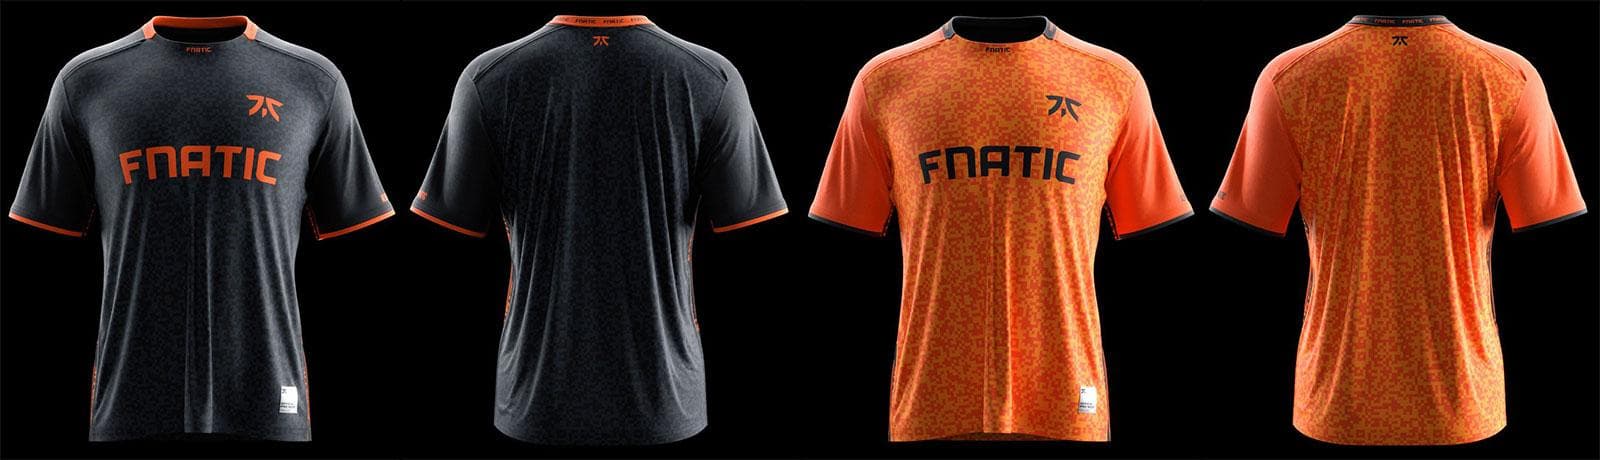 Collection 2020 des maillots Fnatic